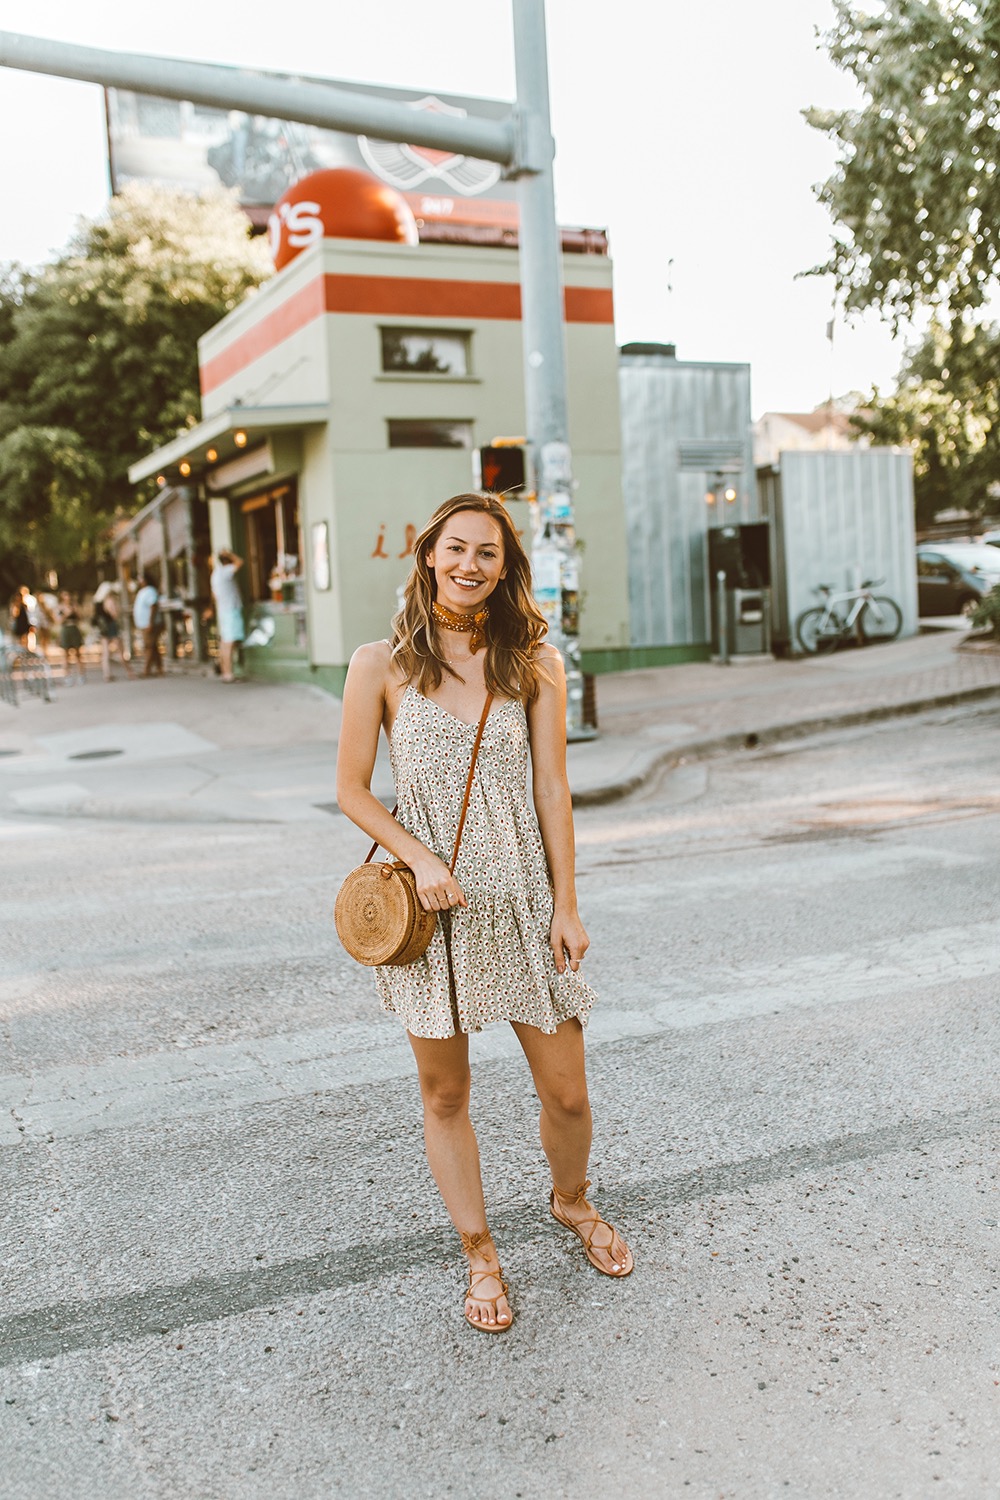 livvyland-blog-olivia-watson-south-congress-i-love-you-so-much-mural-urban-outfitters-harper-babydoll-floral-tie-back-dress-bandana-neck-5